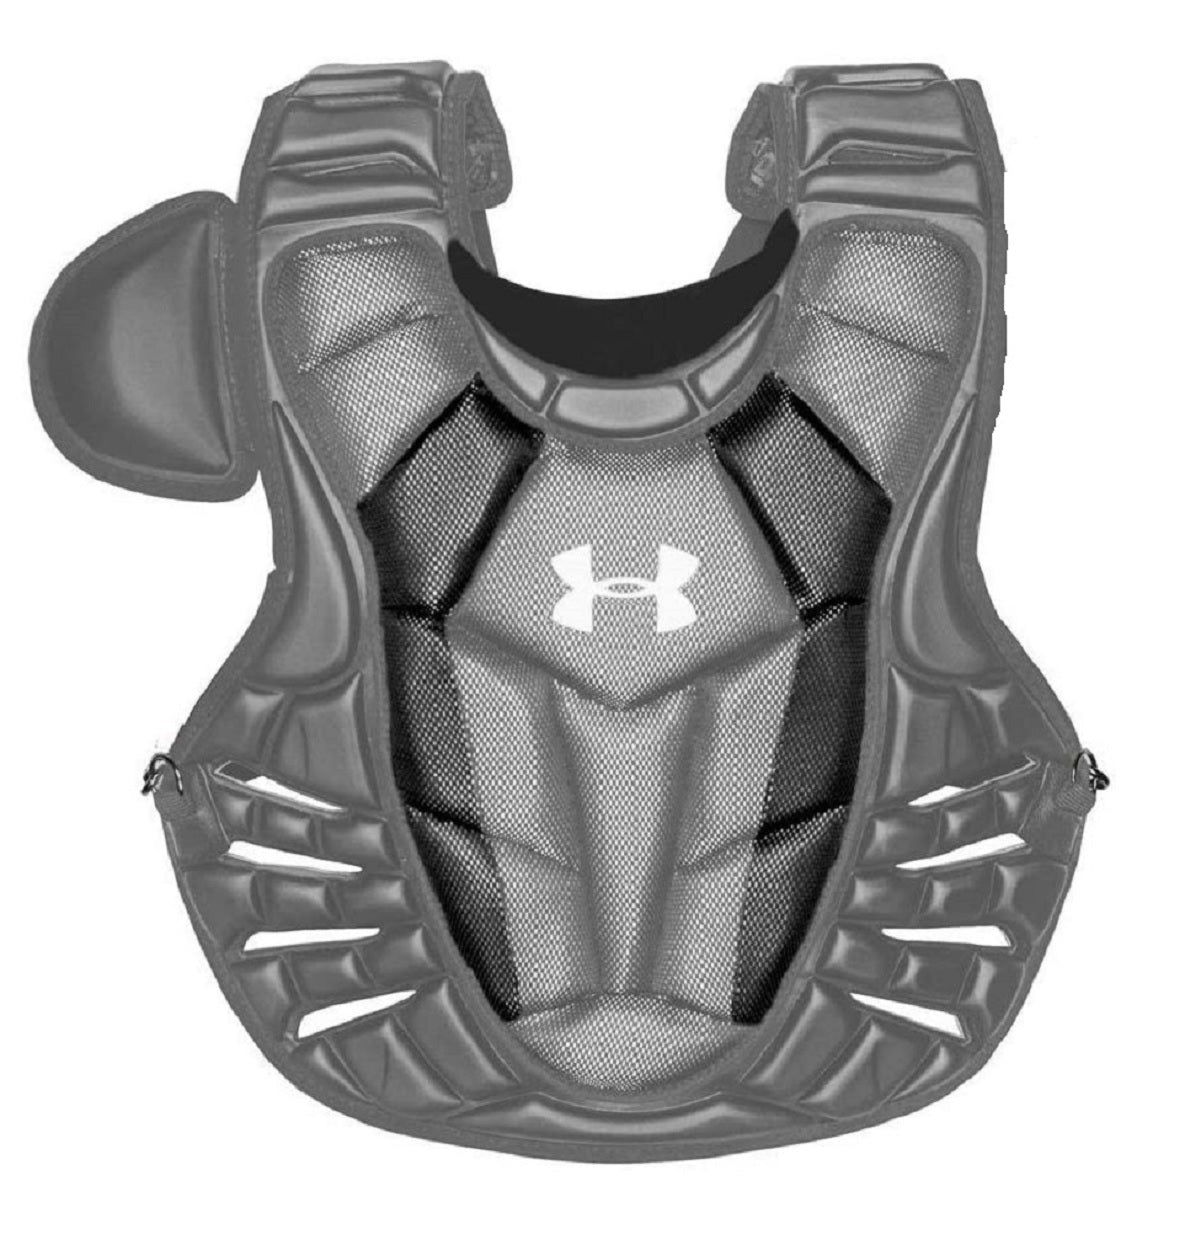 Under Armour Youth Converge Pro Chest Protector Graphite Ages 9-12 Years